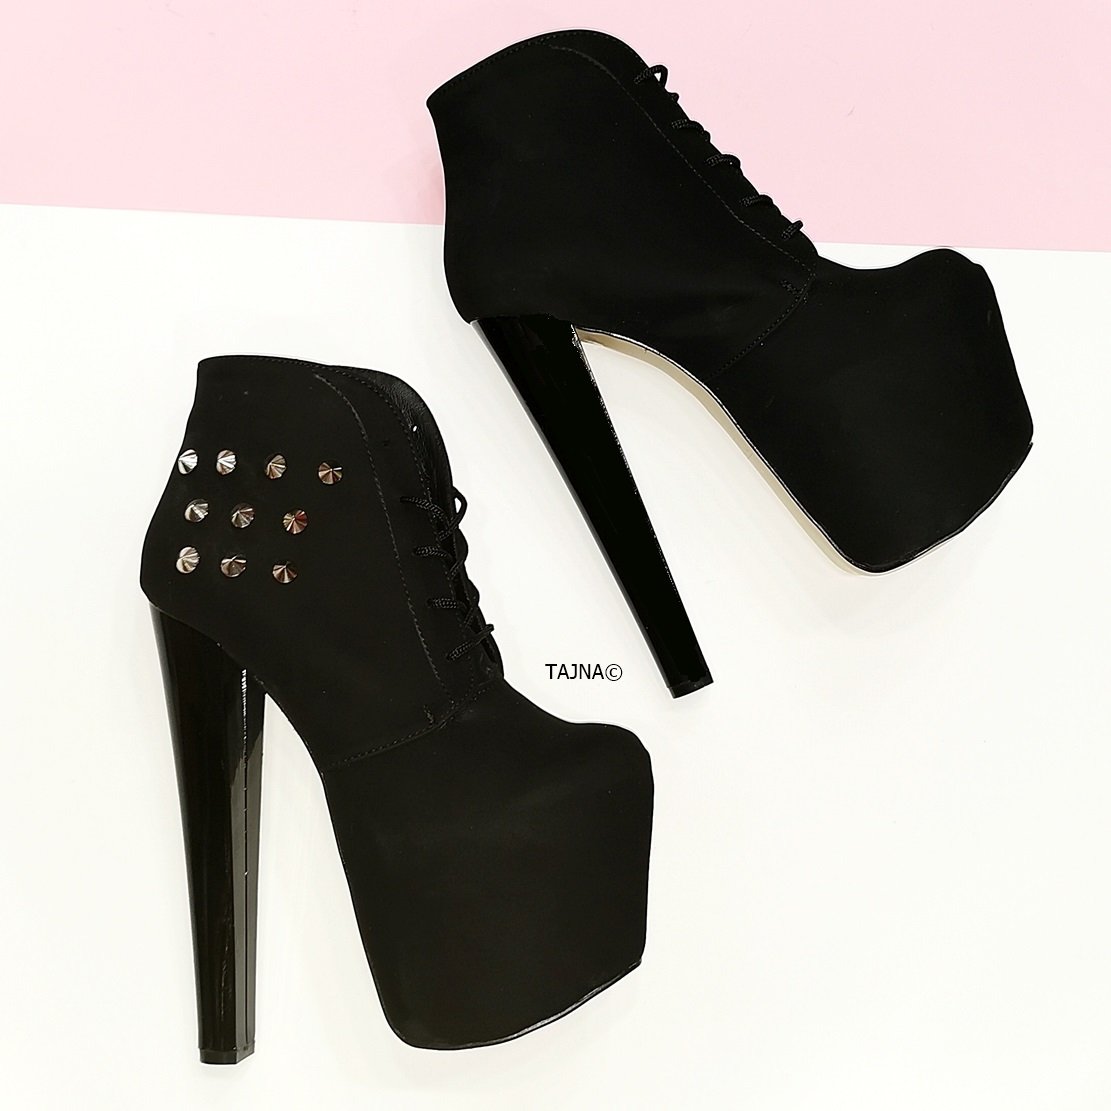 Pinned Ledna Black Suede Ankle Booties - Tajna Club